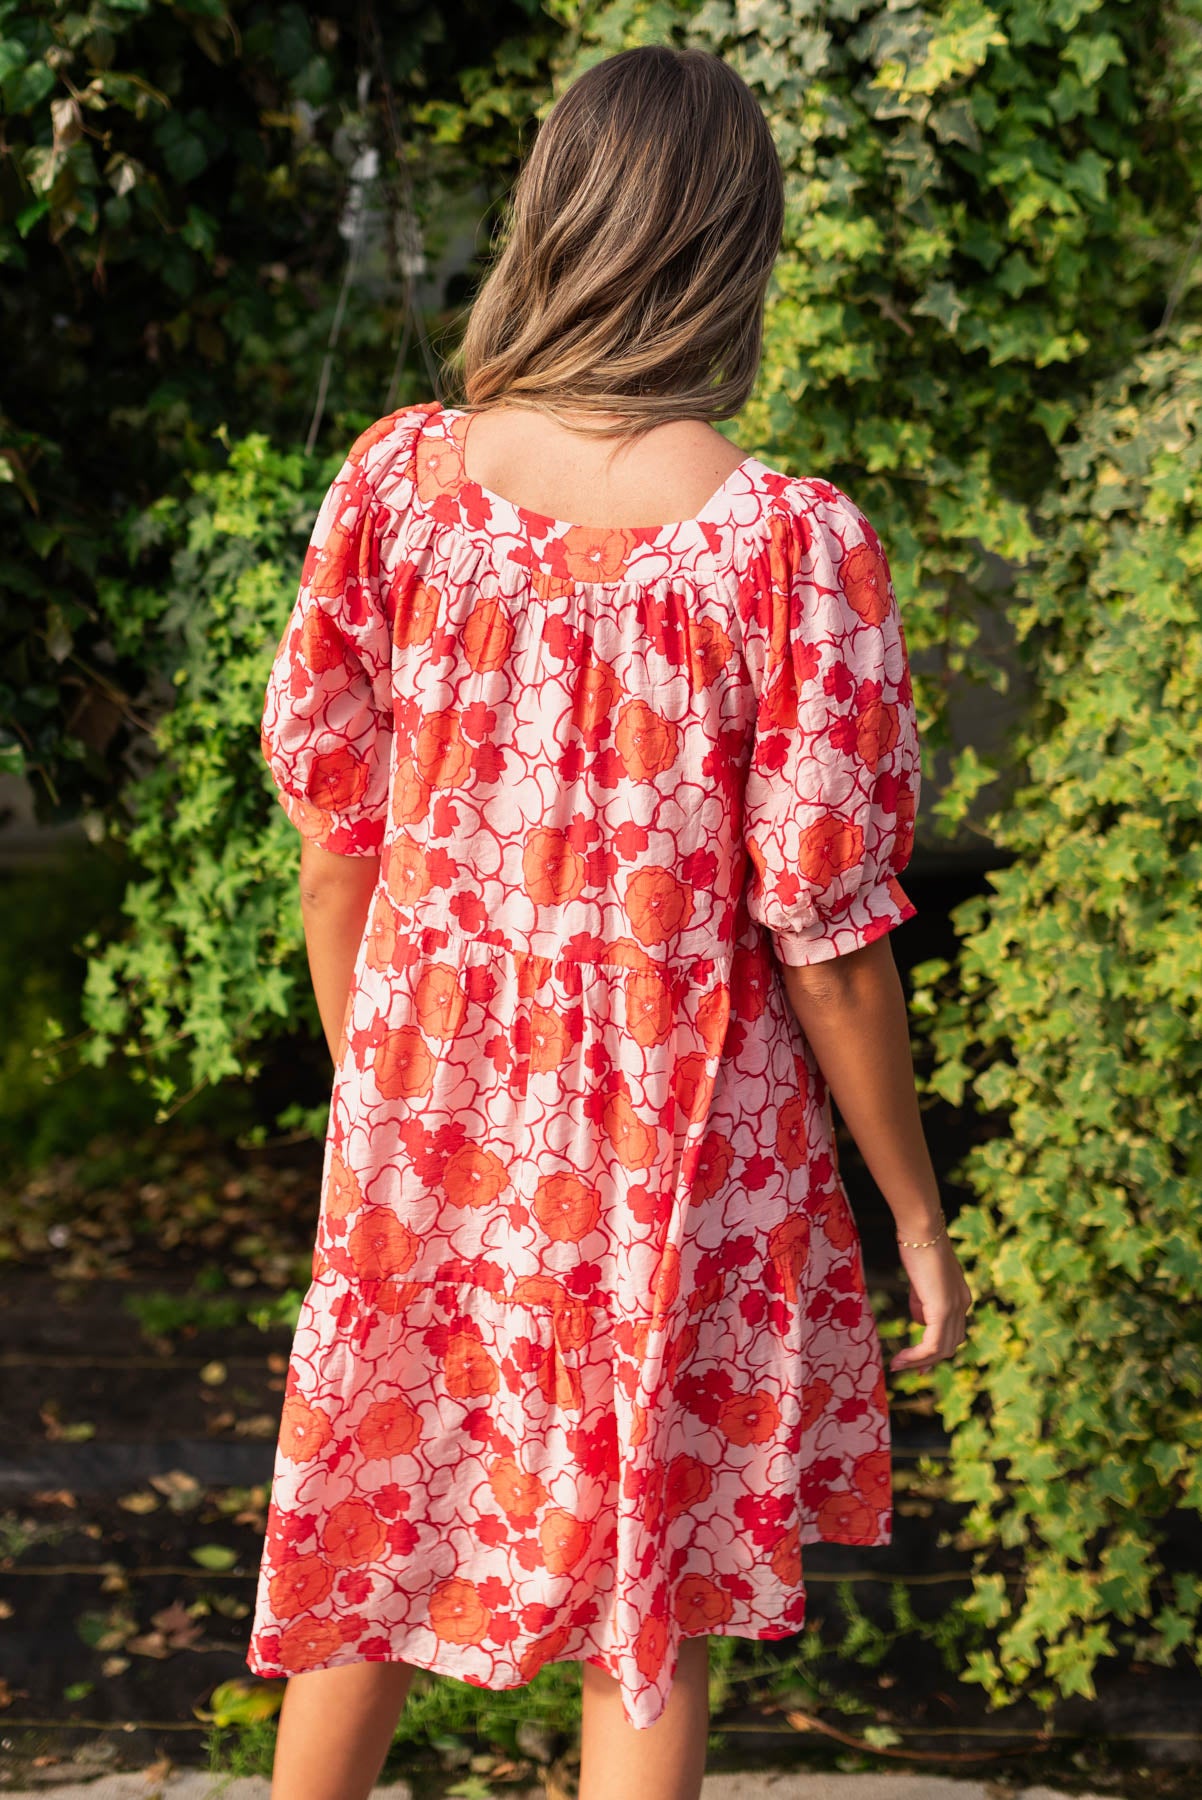 Back view of the pink floral dress